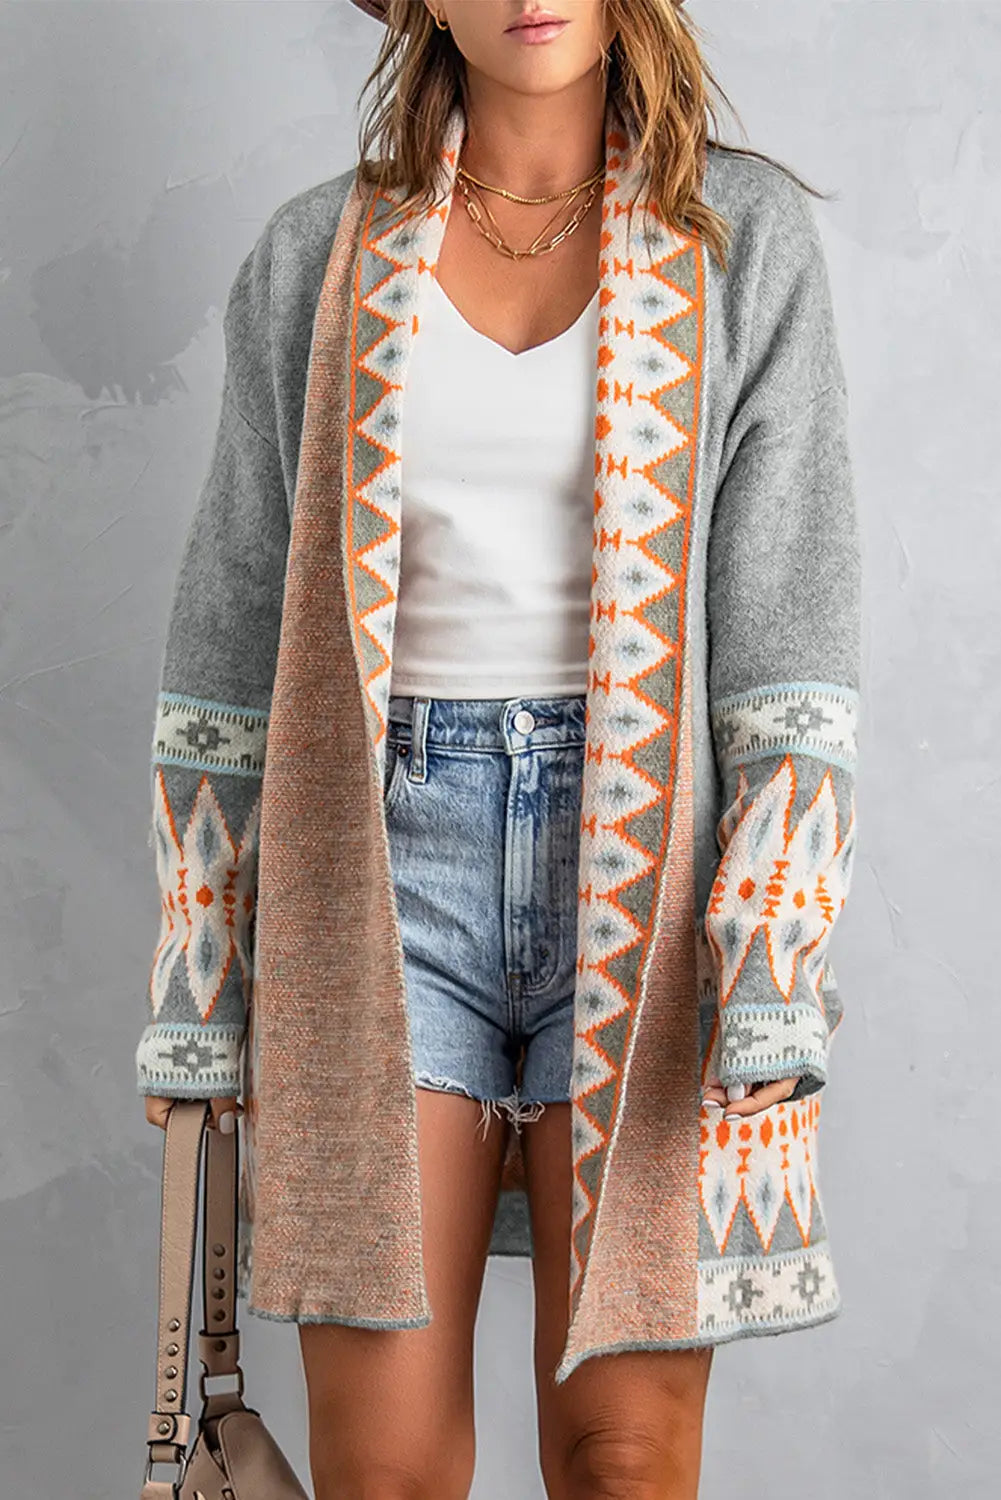 Gray aztec print open front knitted cardigan - s / 48% acrylic + 28% nylon + 24% rayon - sweaters & cardigans